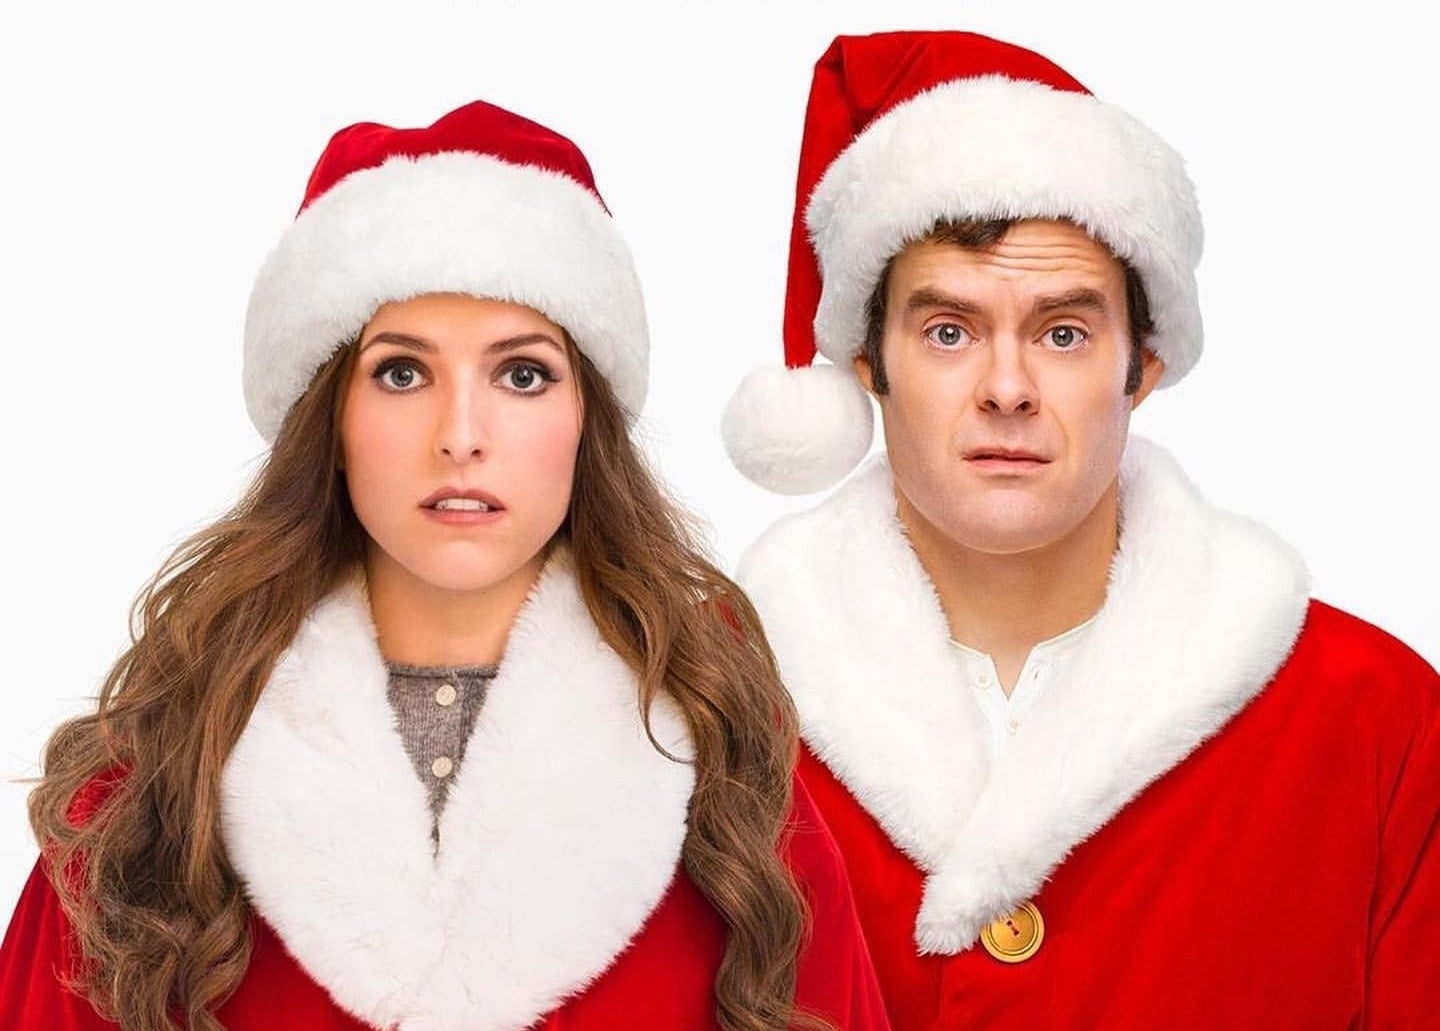 on the Noelle poster, both Anna and Bill wear Santa hats and coats